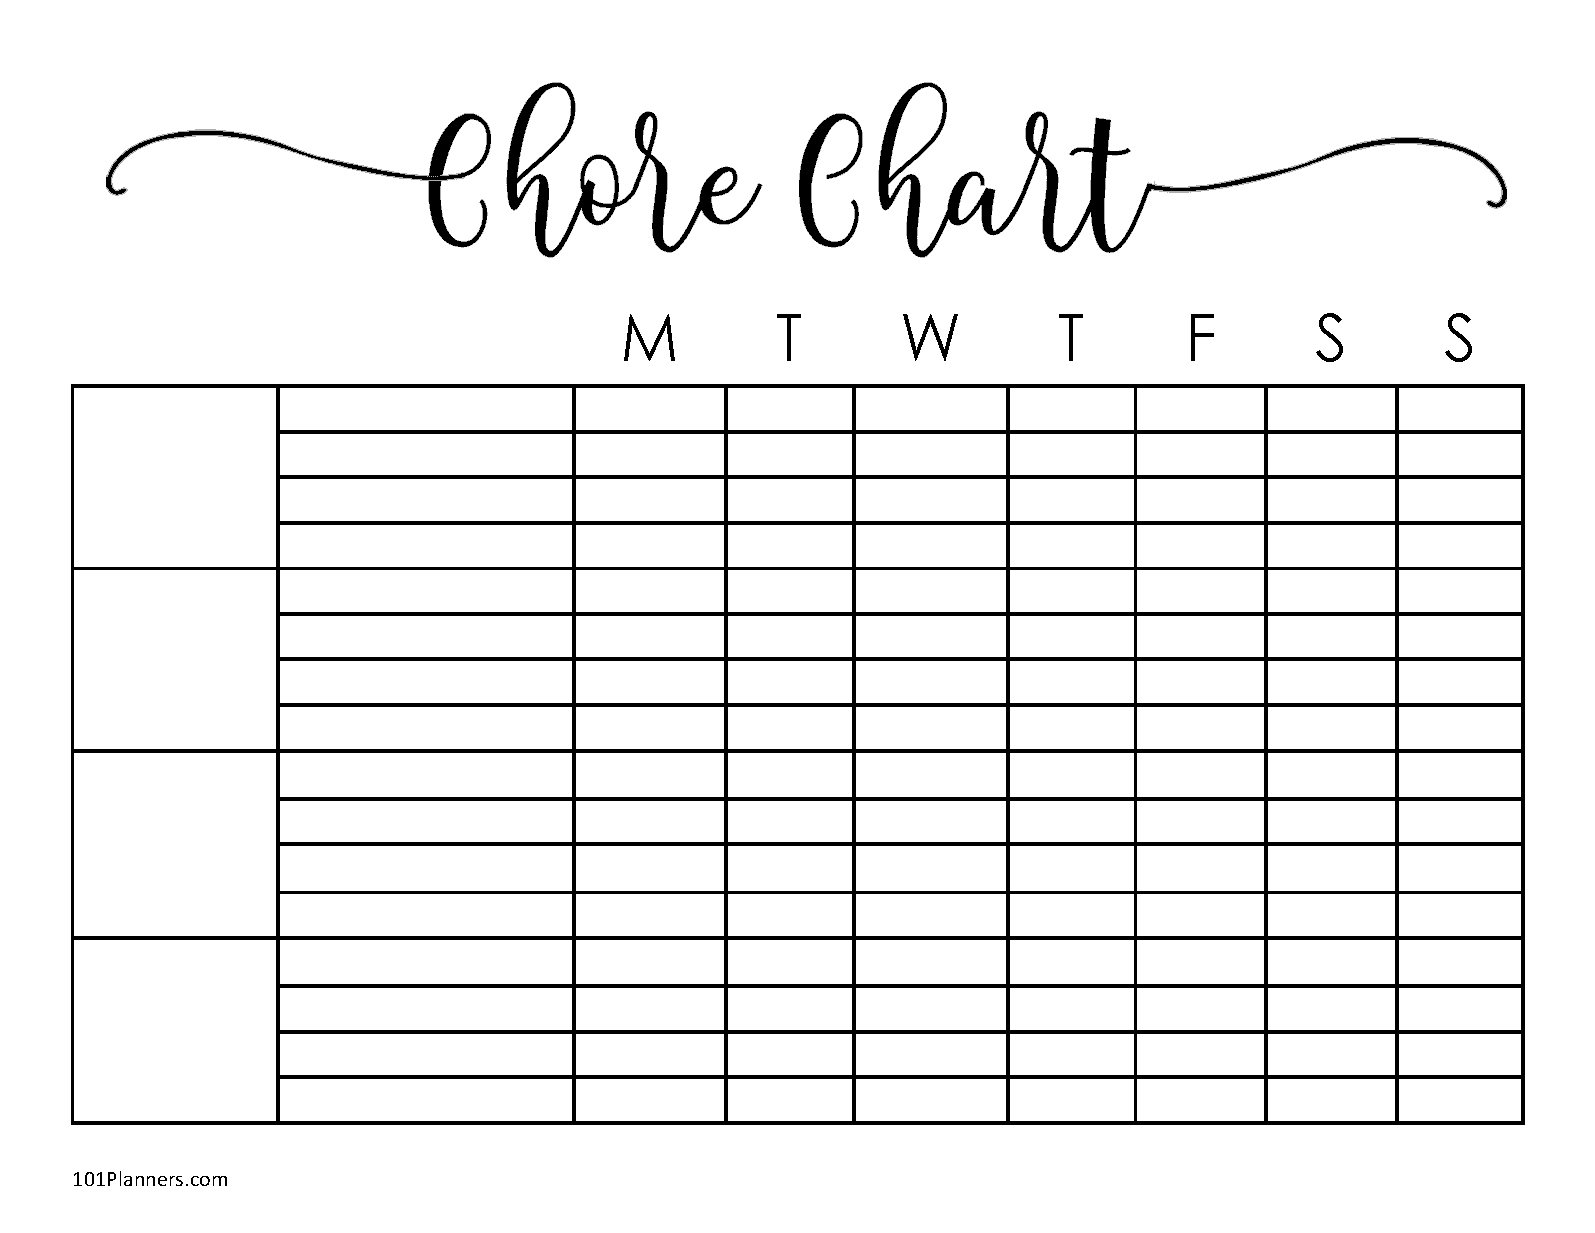 Free Chore Chart Template | 101 Different Designs